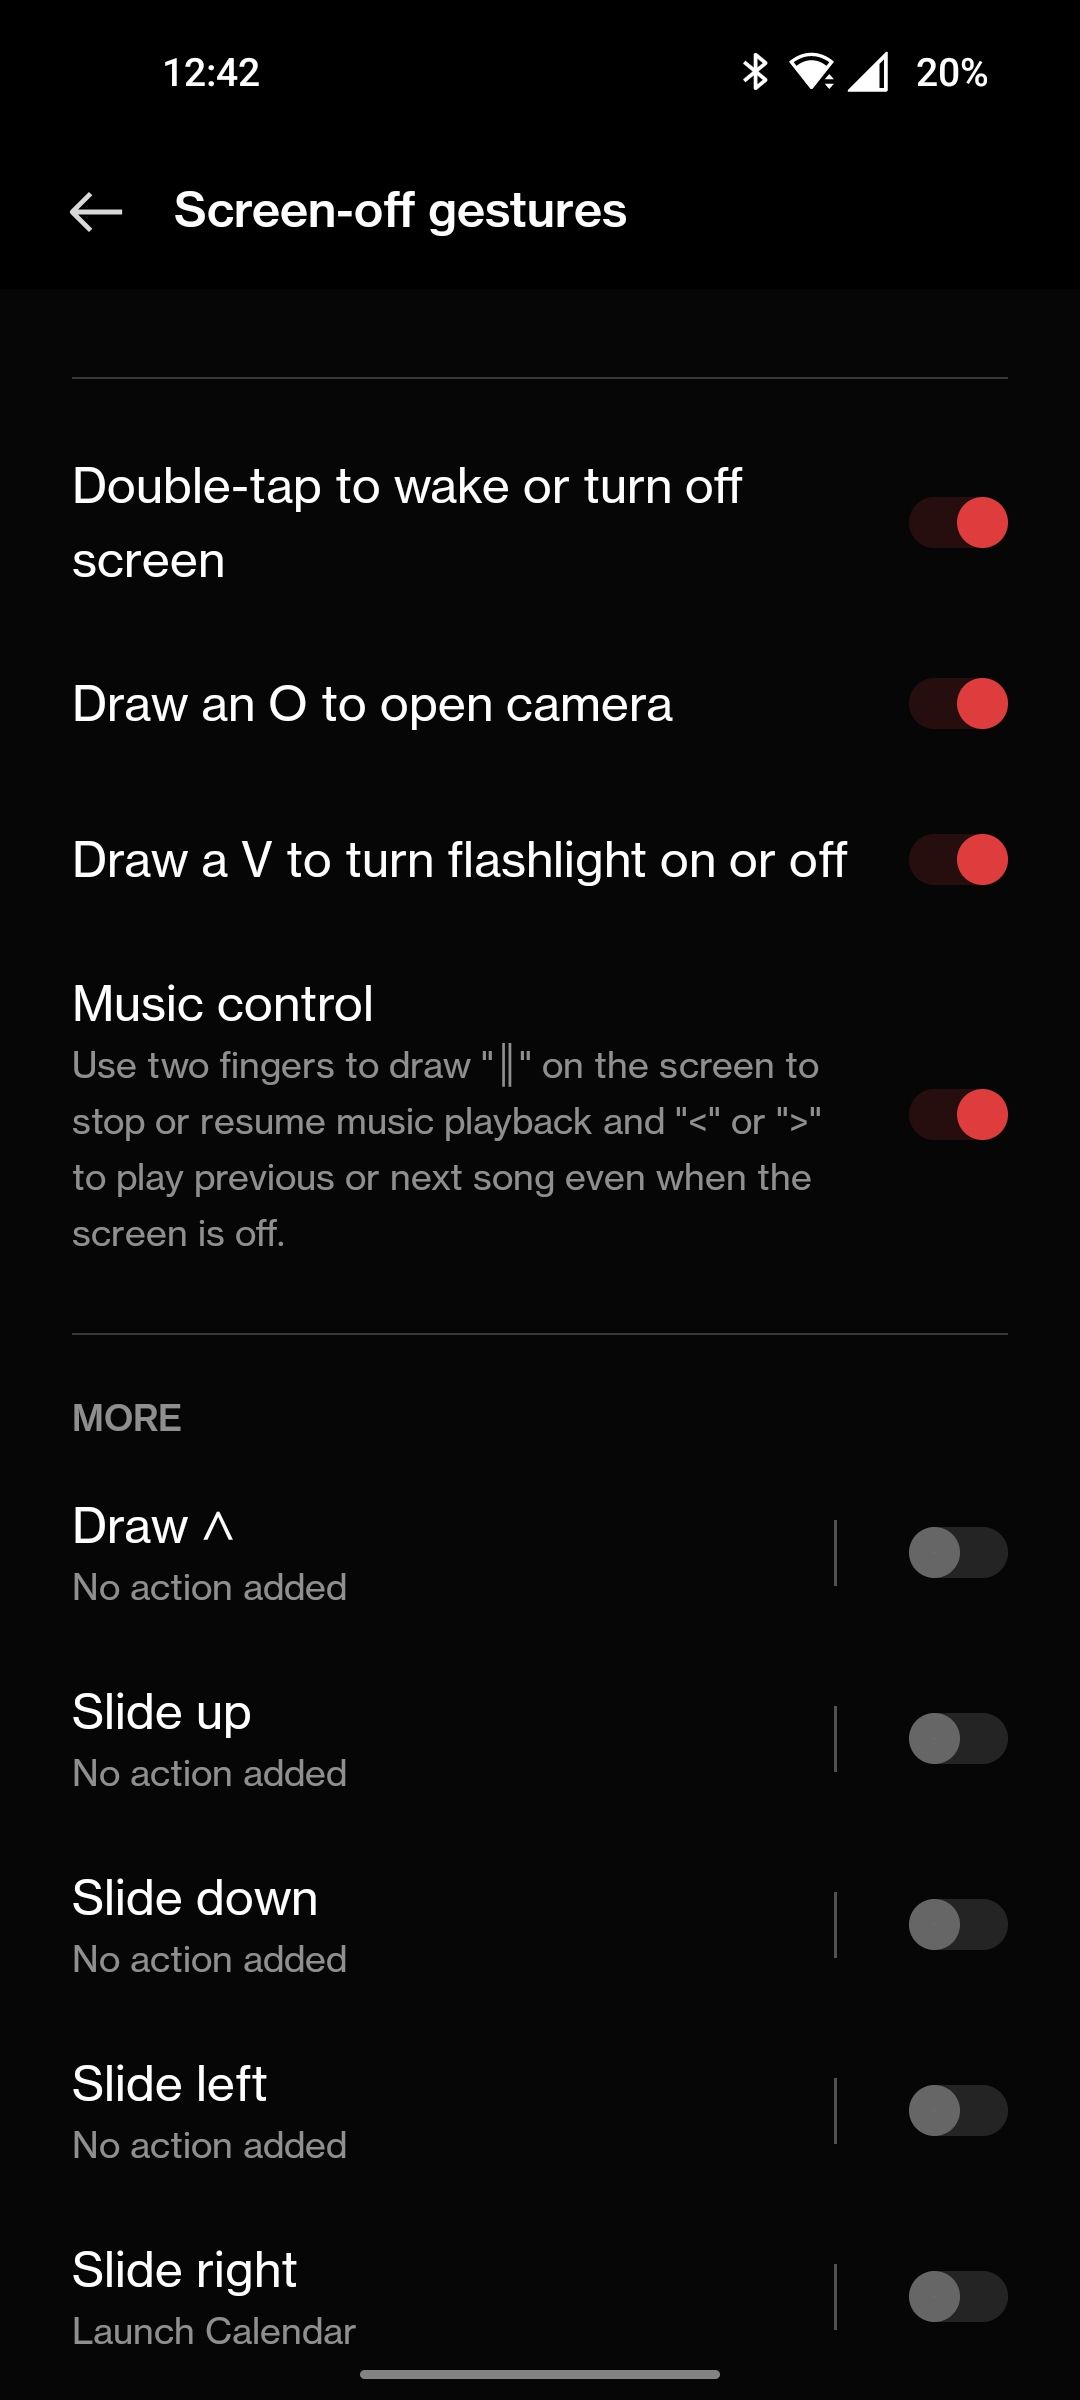 OnePlus screen-off gestures with actions